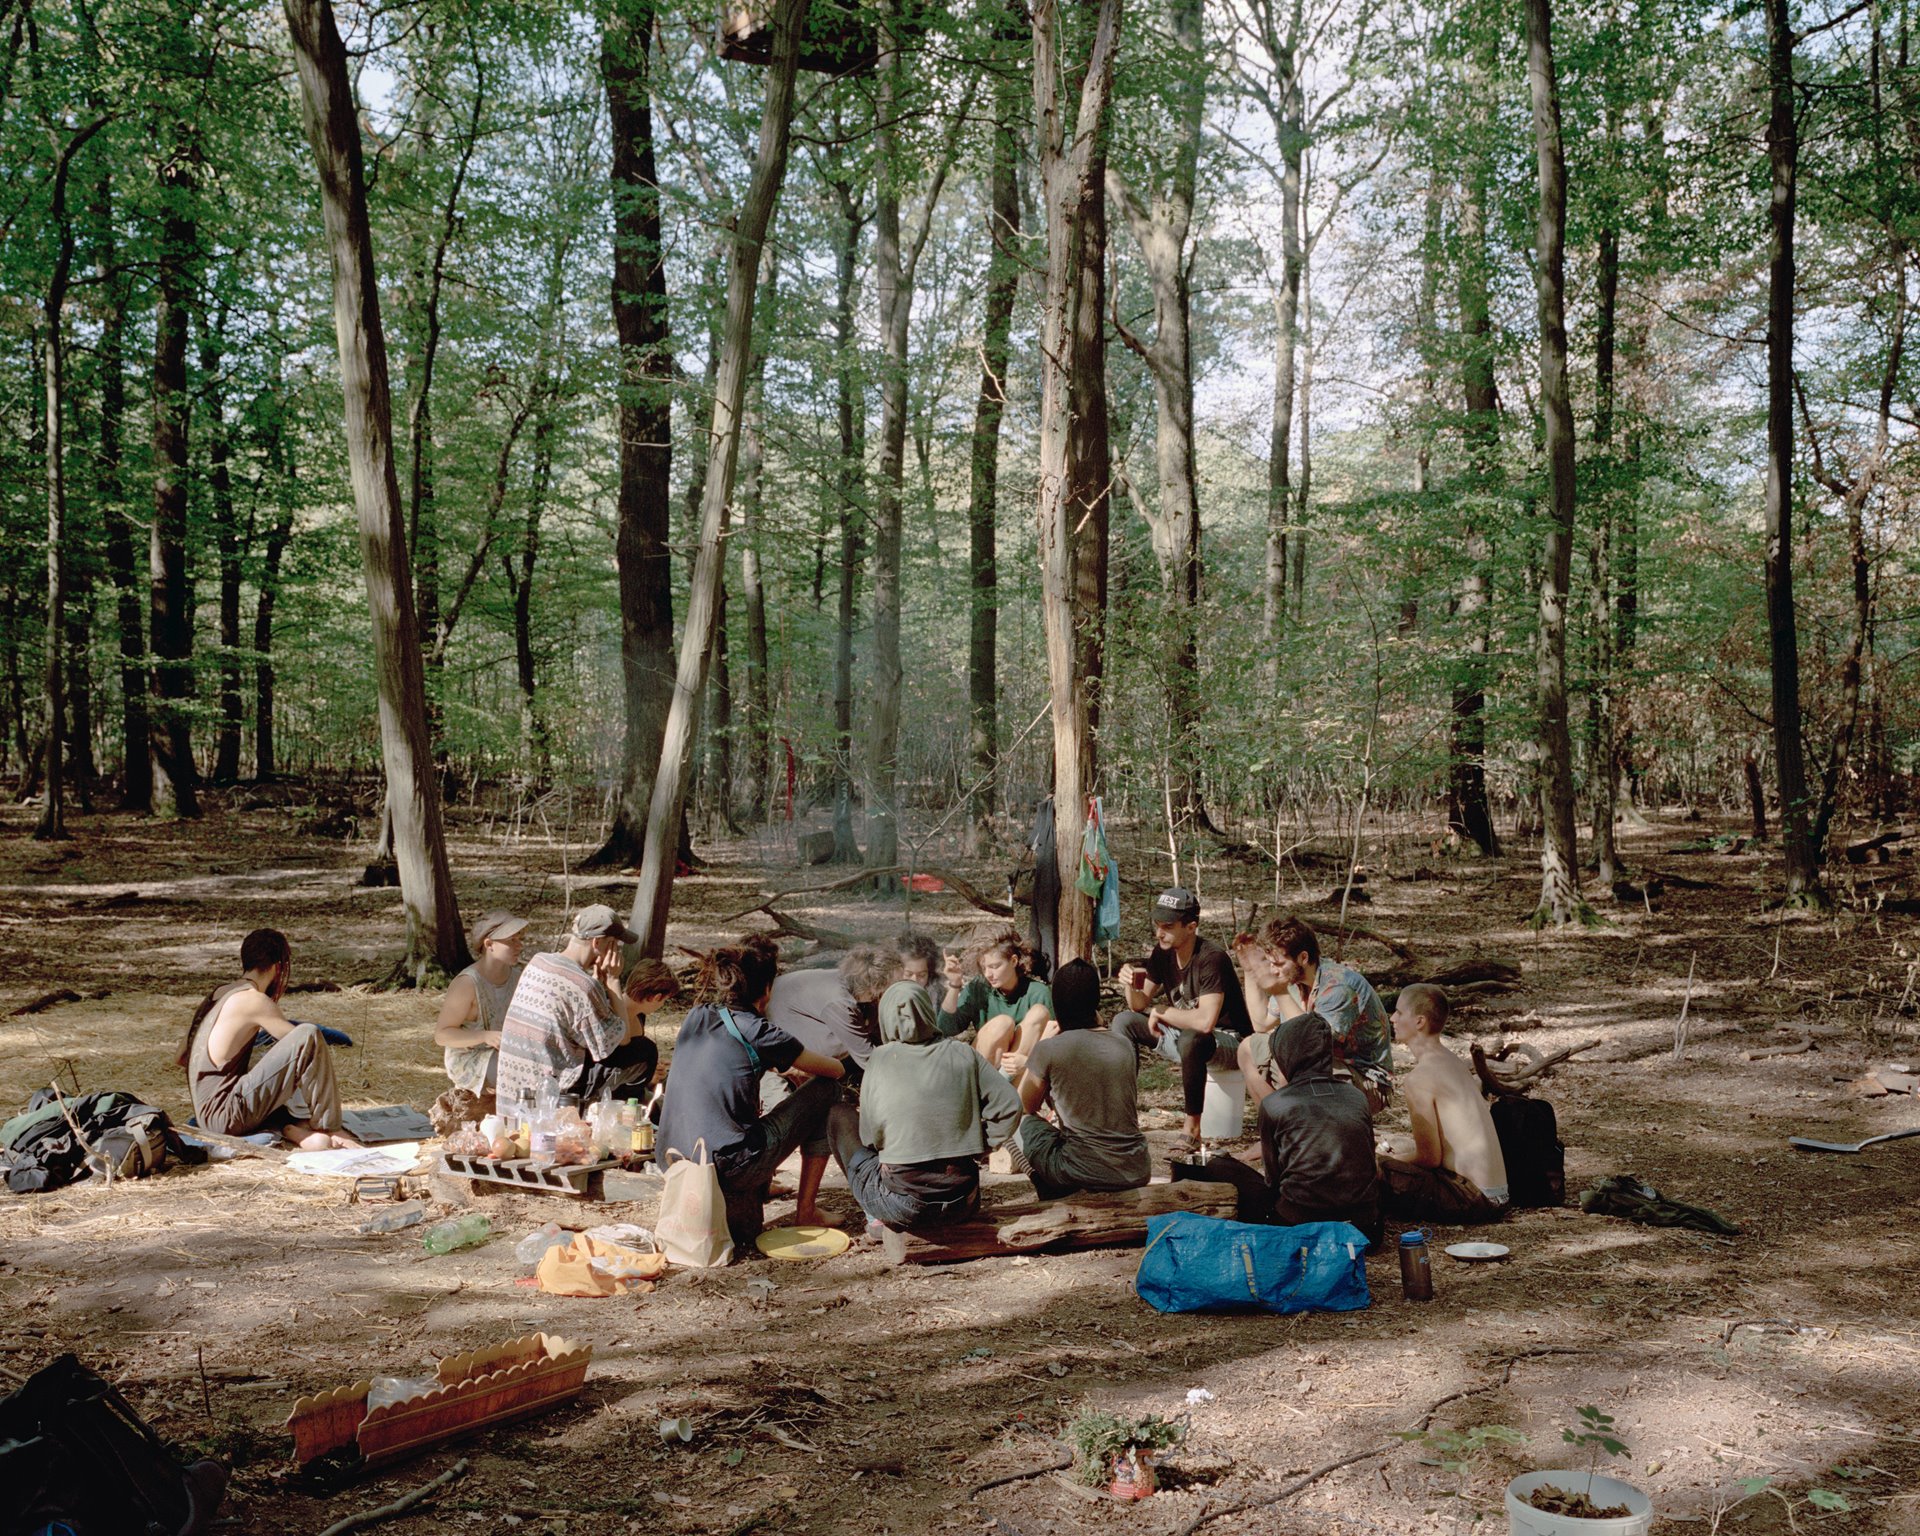 Activists from the &quot;Kleingartenverein&quot; treehouse settlement sit together to discuss group &nbsp;strategy for the upcoming eviction from Hambach Forest, near Kerpen, Germany.